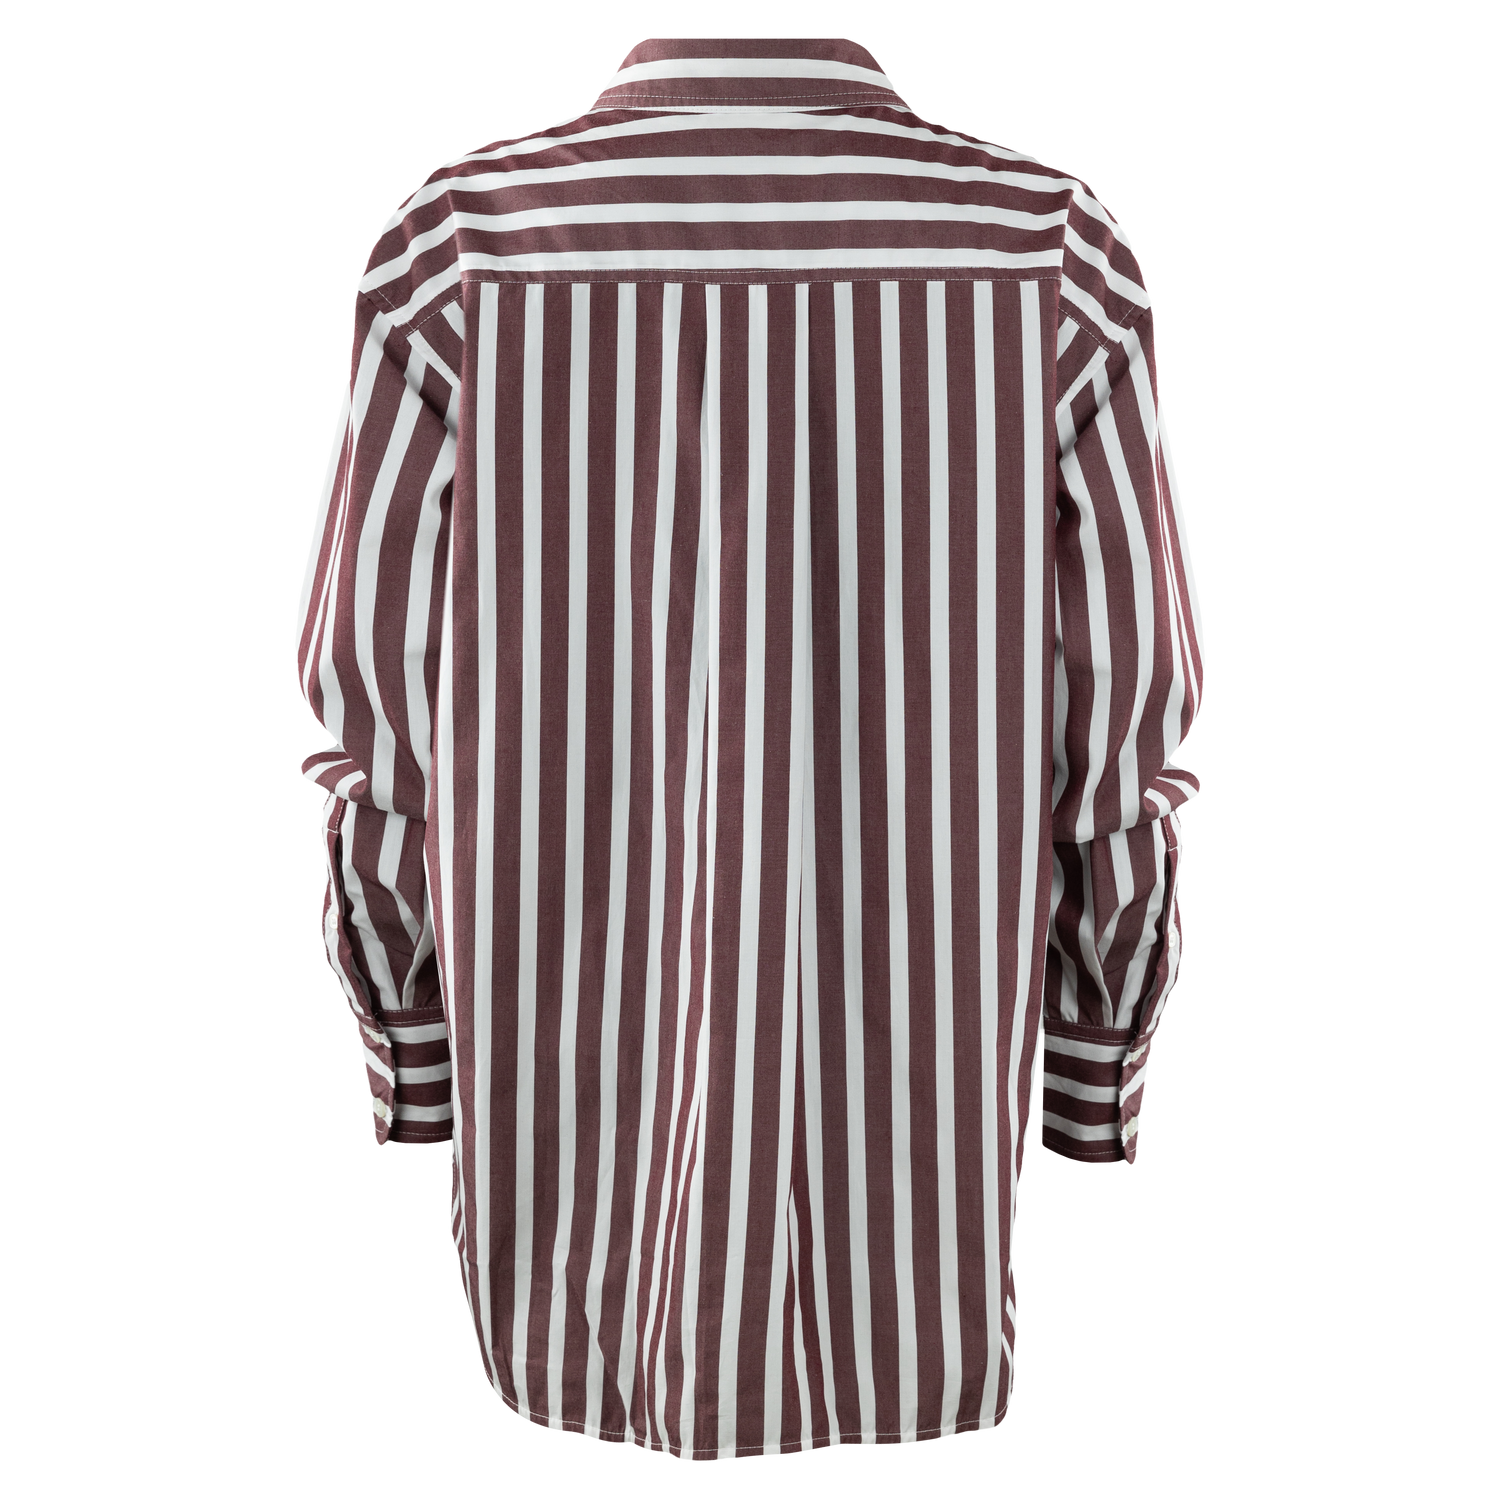 Maroon Striped Button Down Top